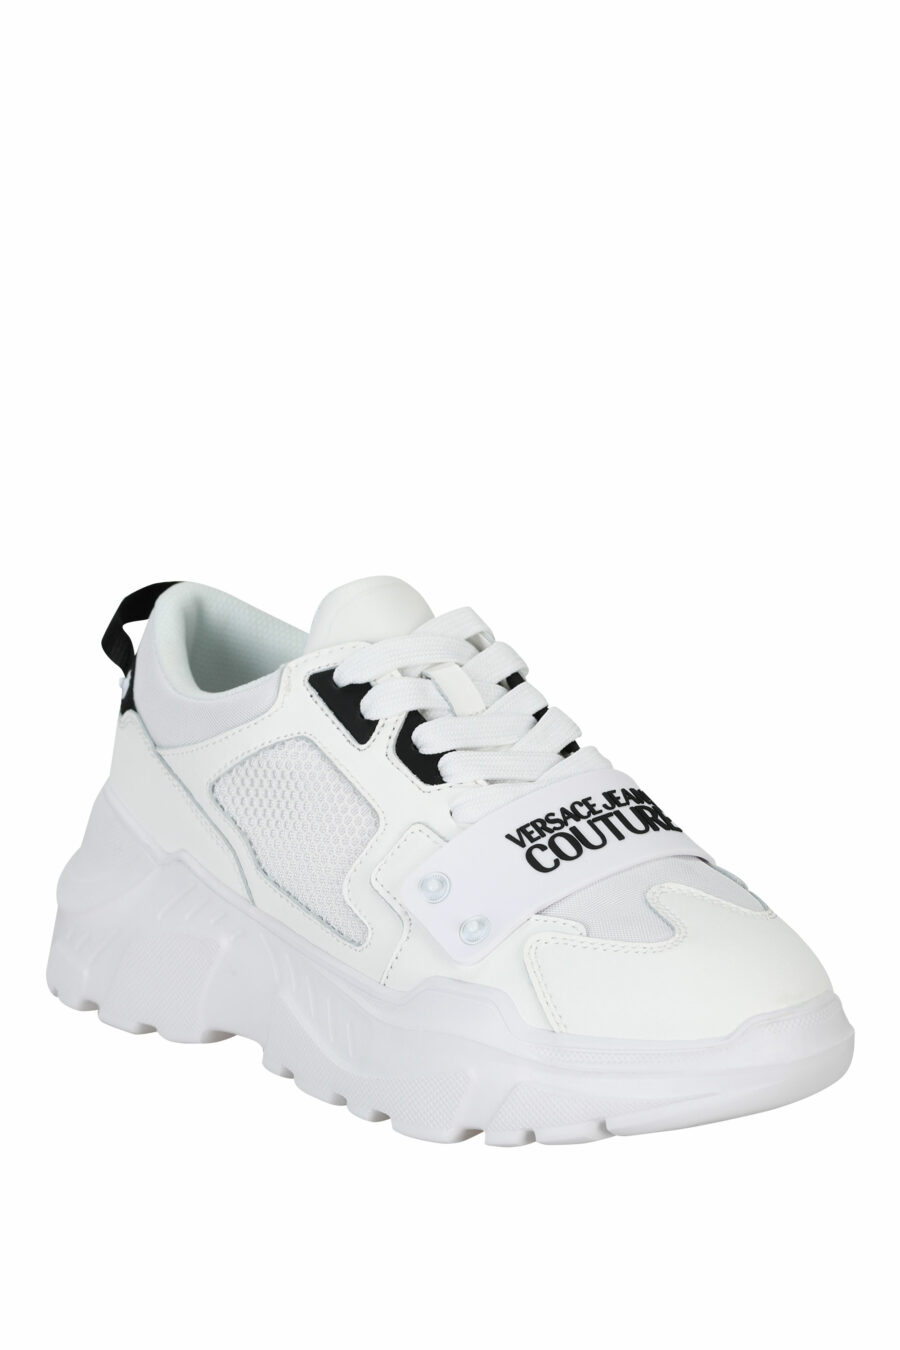 White "speedtrack" shoes with black rubber mini-logo on the front - 8052019604337 1